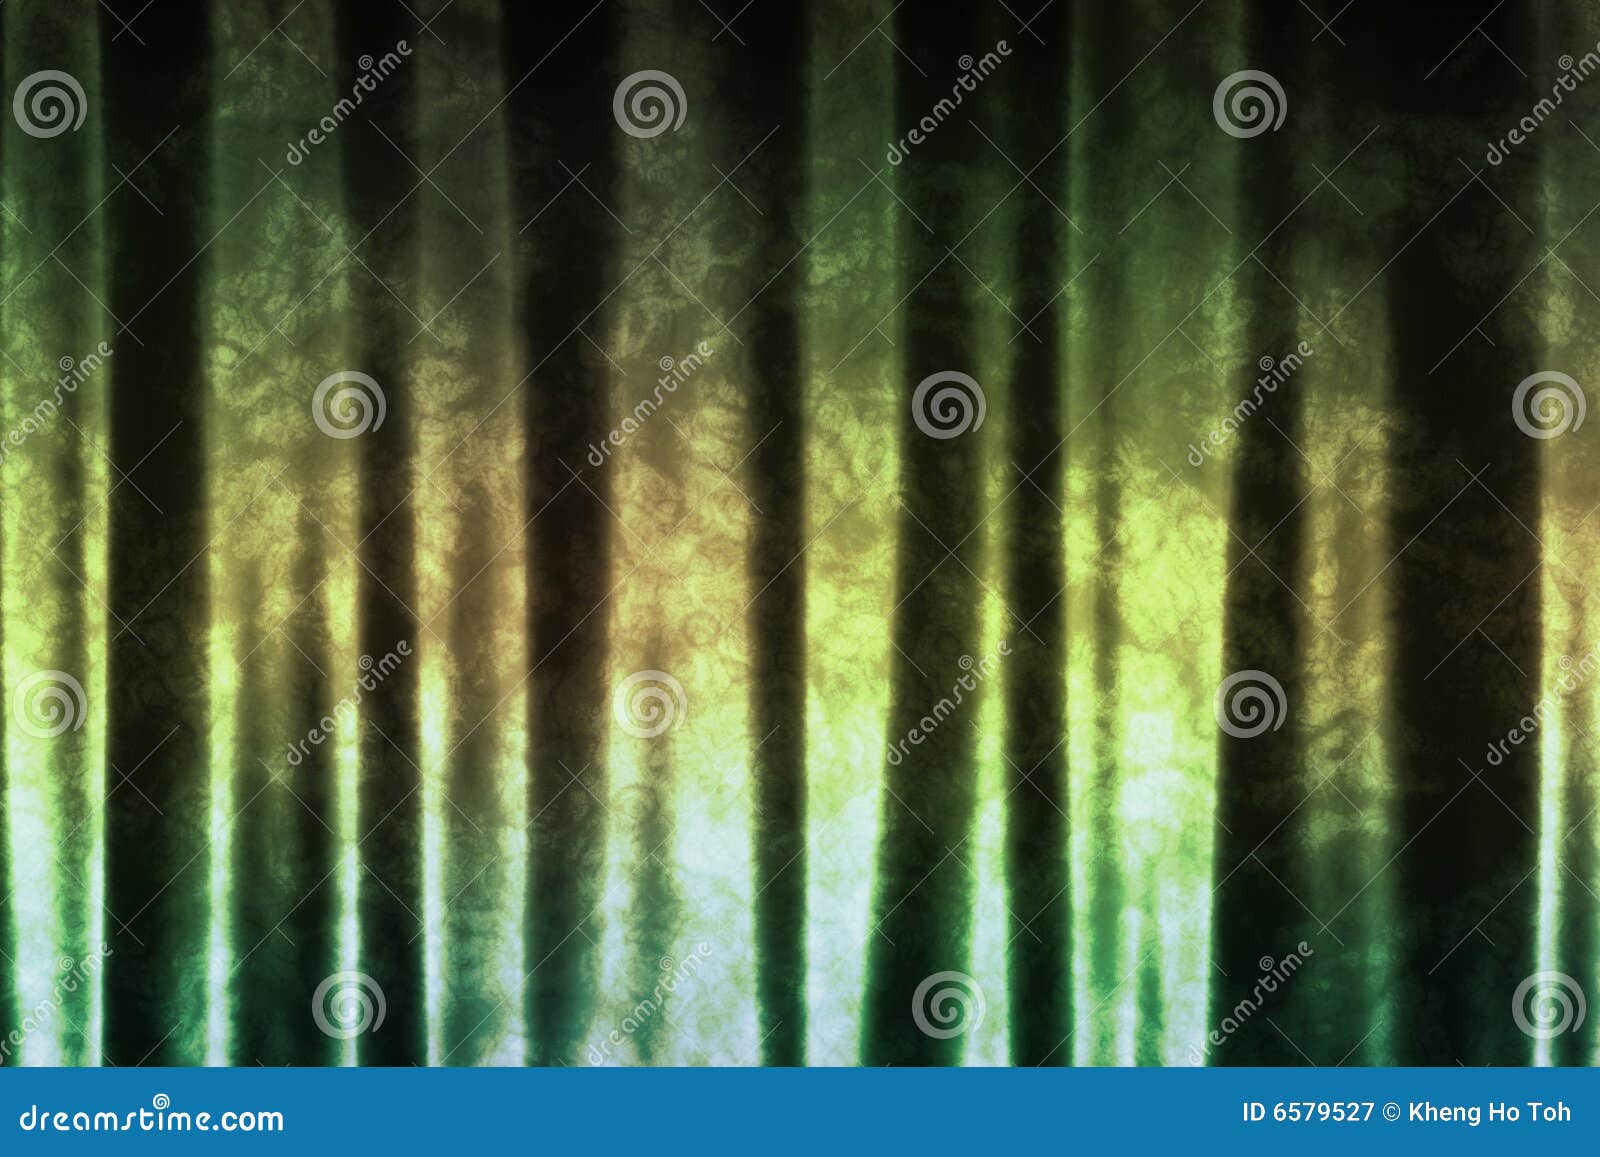 subdued green abstract soothing background